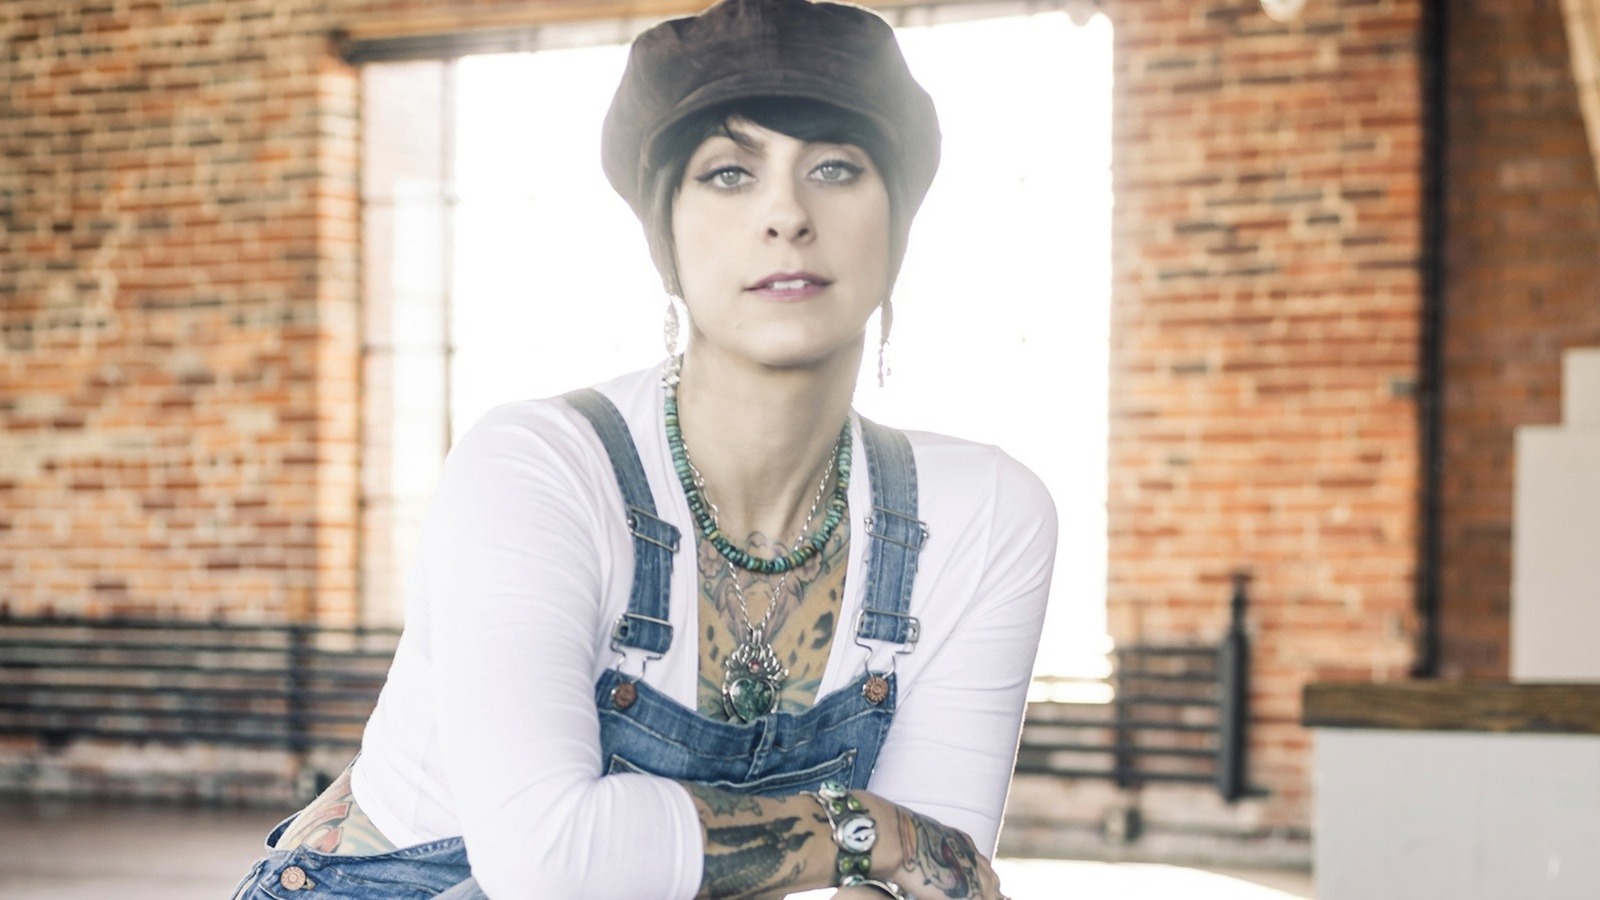 annette mancini recommends danielle colby cushman pictures pic